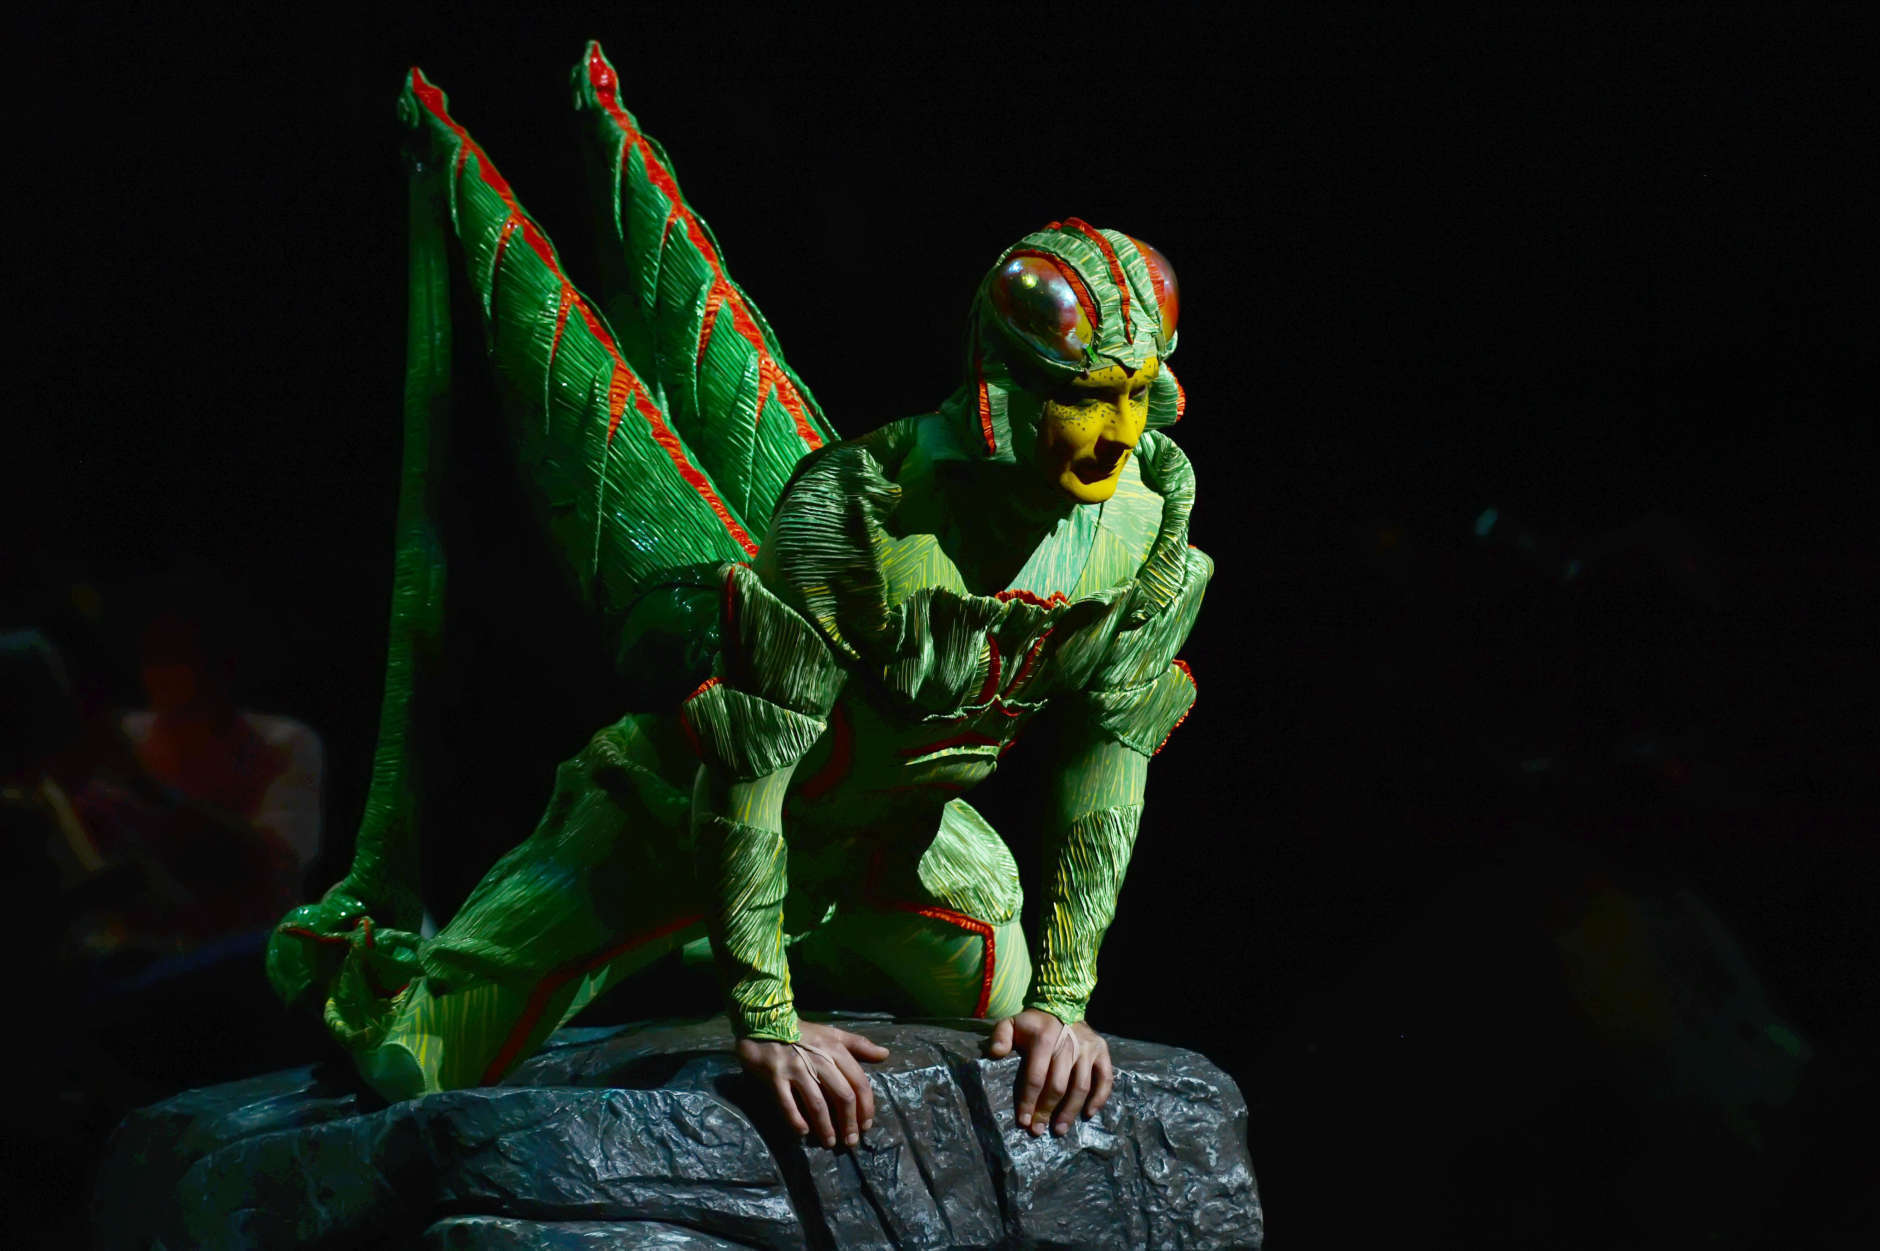 One of the colony of crickets interacts with the audience at Cirque du Soleil's "OVO." (Courtesy Shannon Finney/shannonfinneyphotography.com)